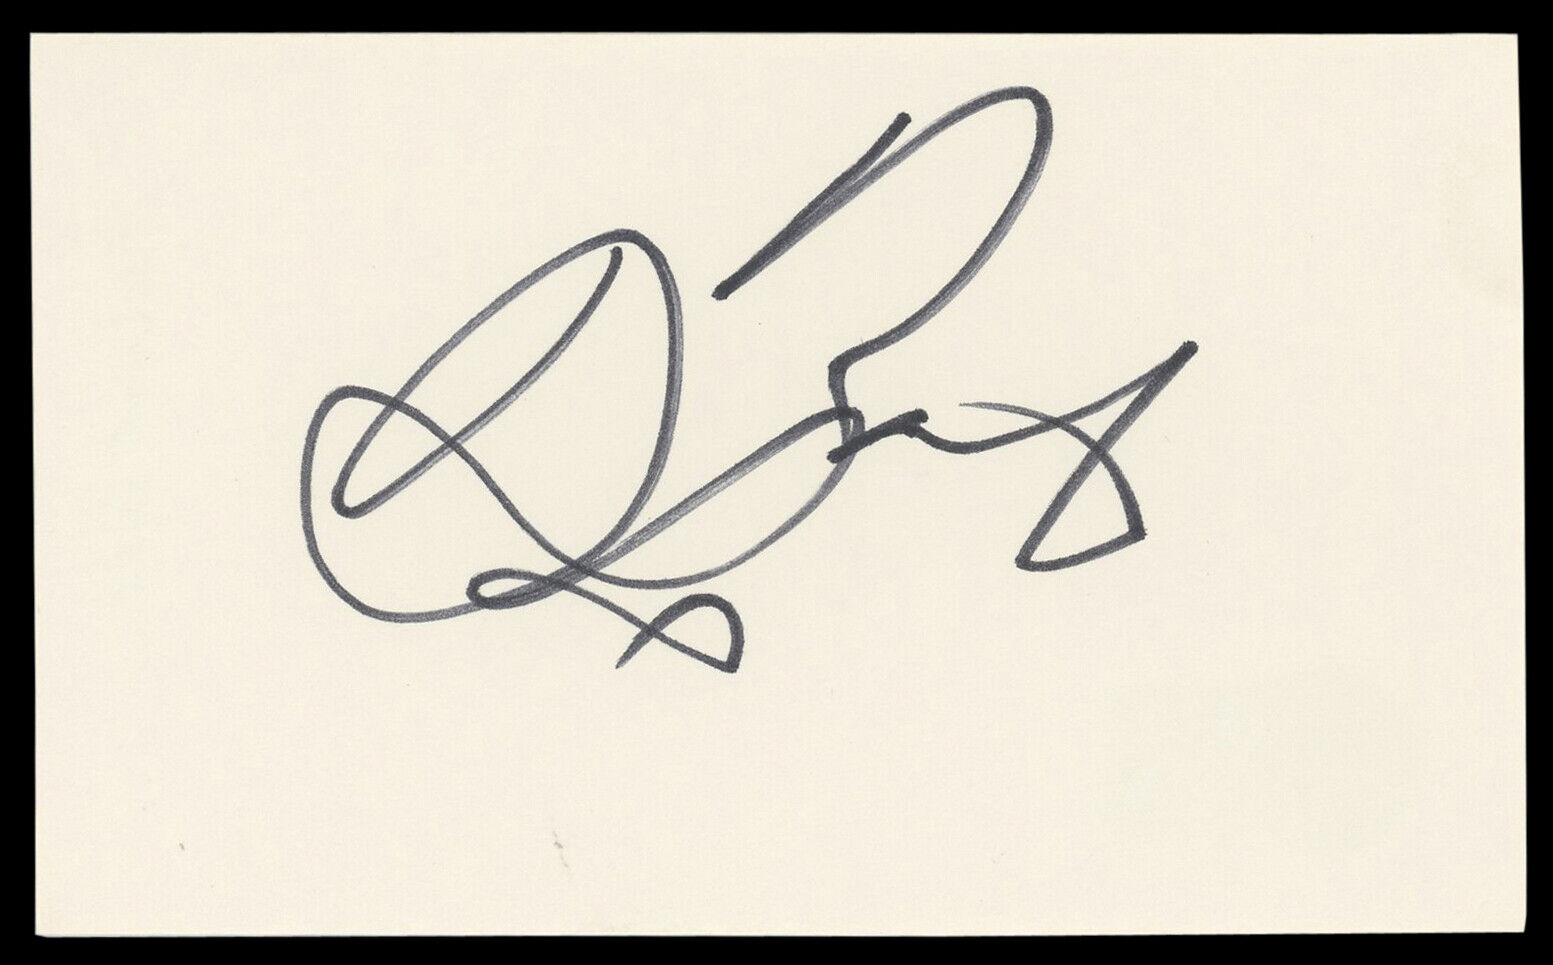 Robert Blake In Cold Blood Signed 3x5 Index Card Autographed BAS #BM57059